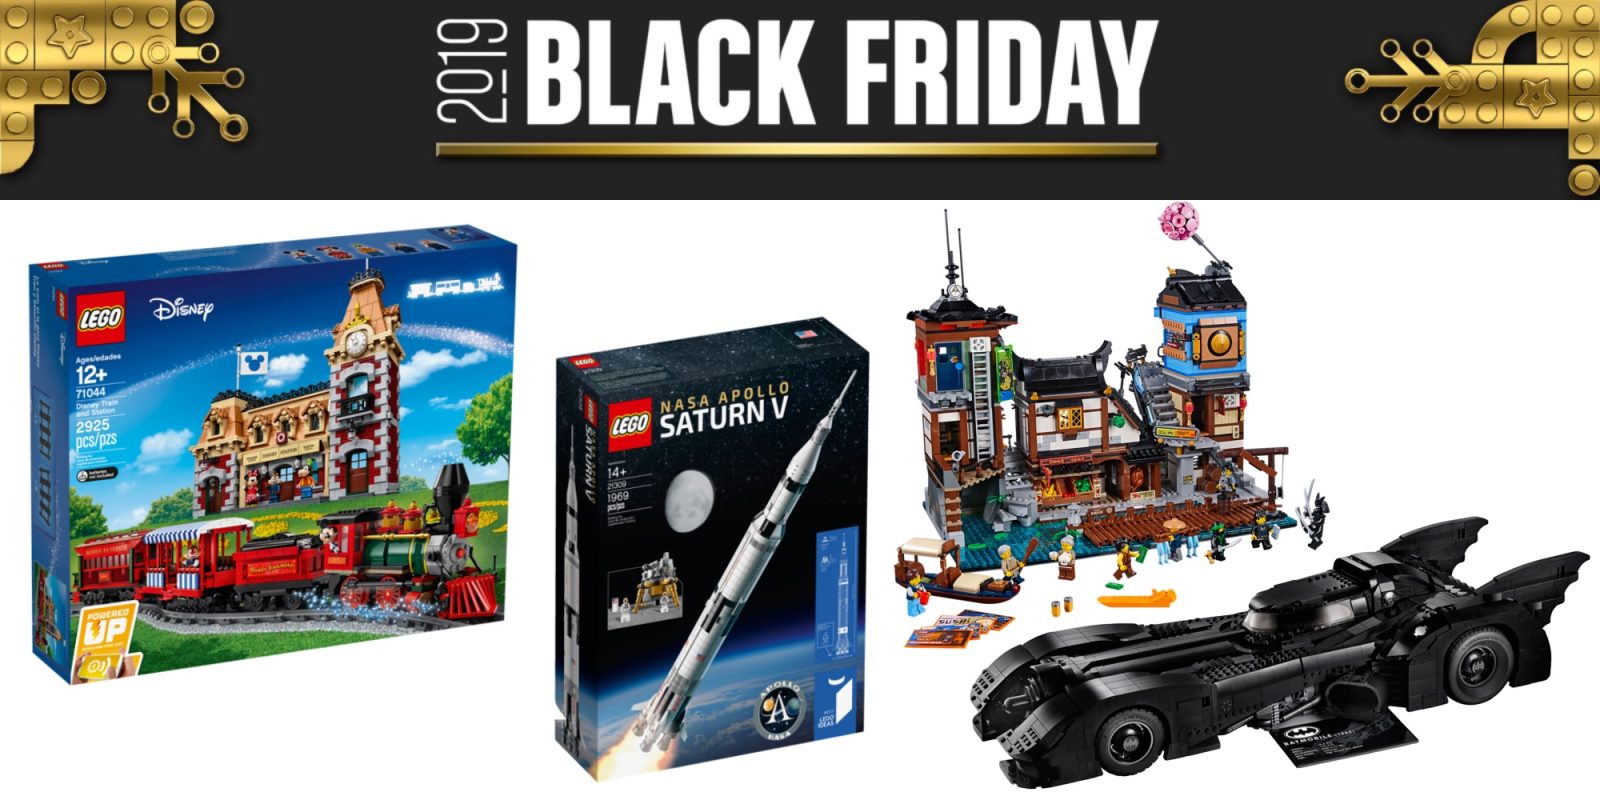 LEGO Black Friday sale 30 off kits, freebies, and more 9to5Toys